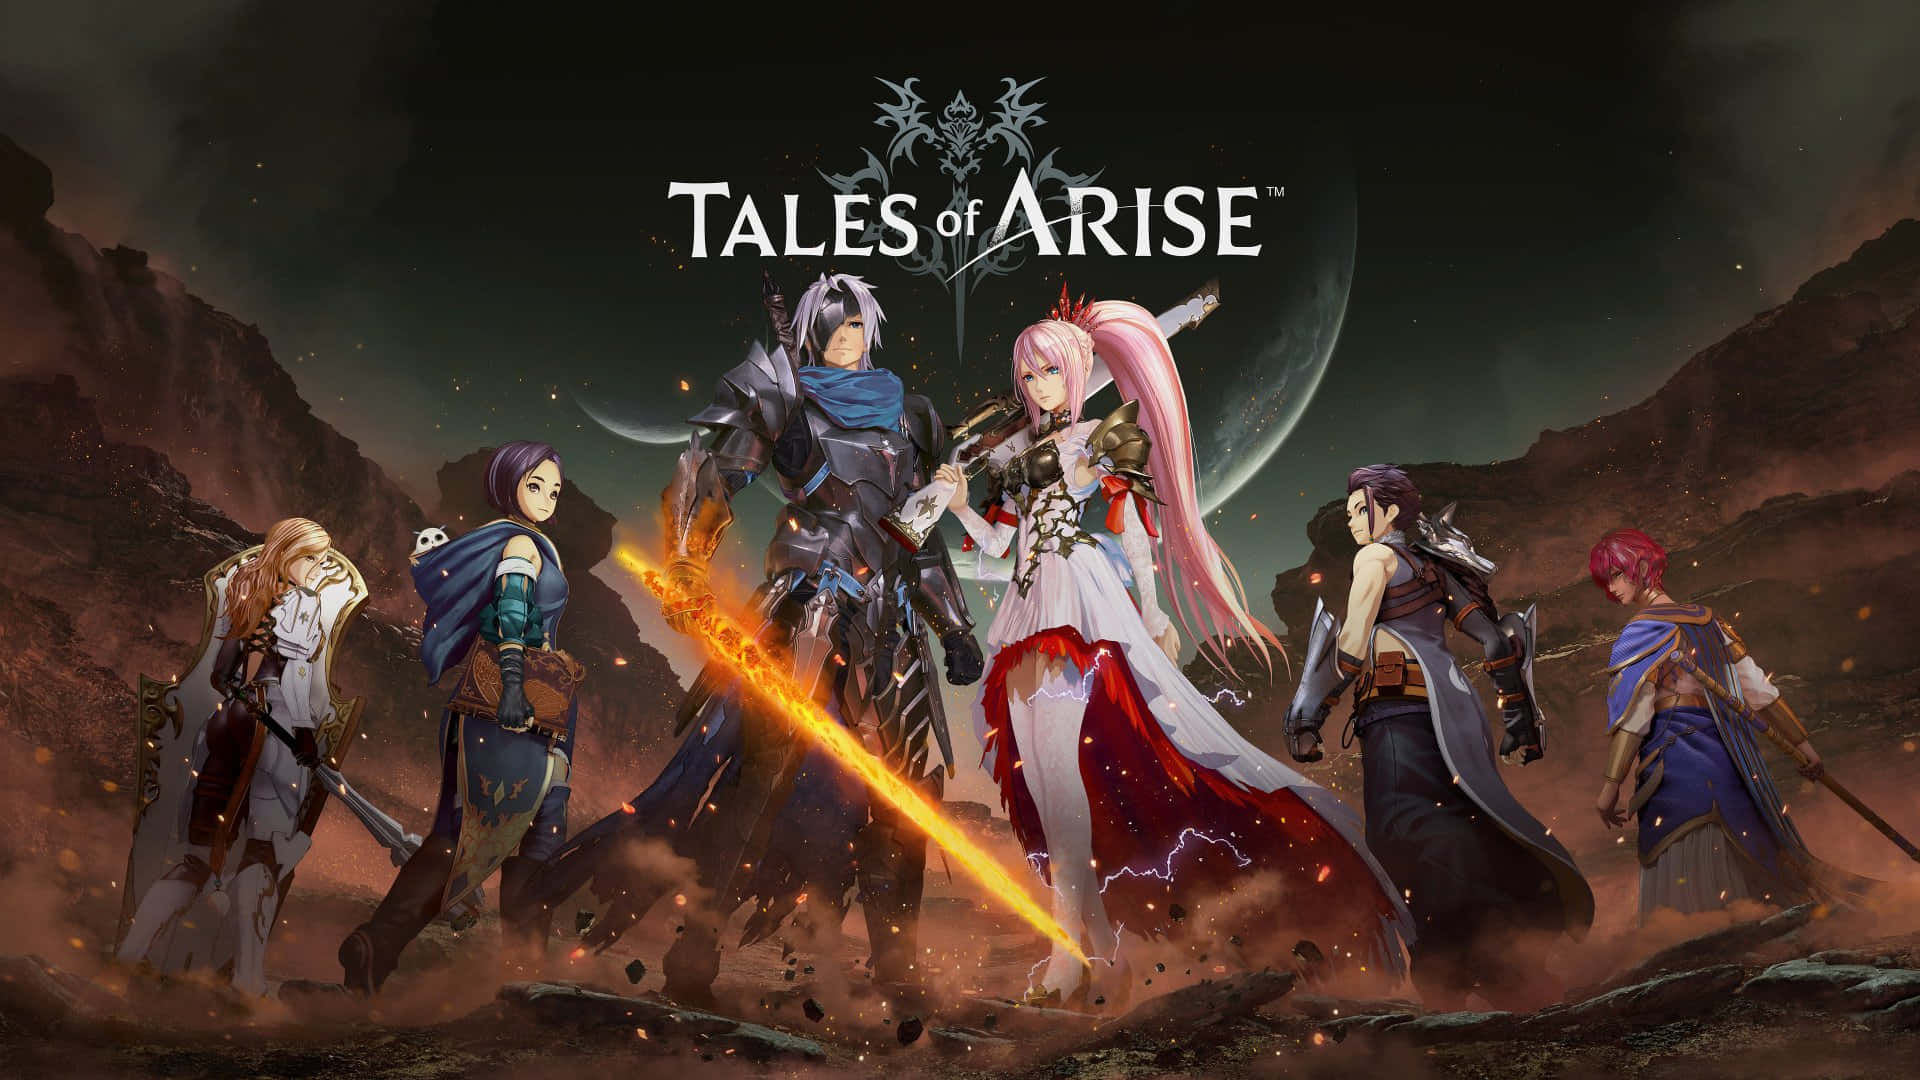 Embark on a journey of fate and discover your unknown destiny in Tales Of Arise Wallpaper